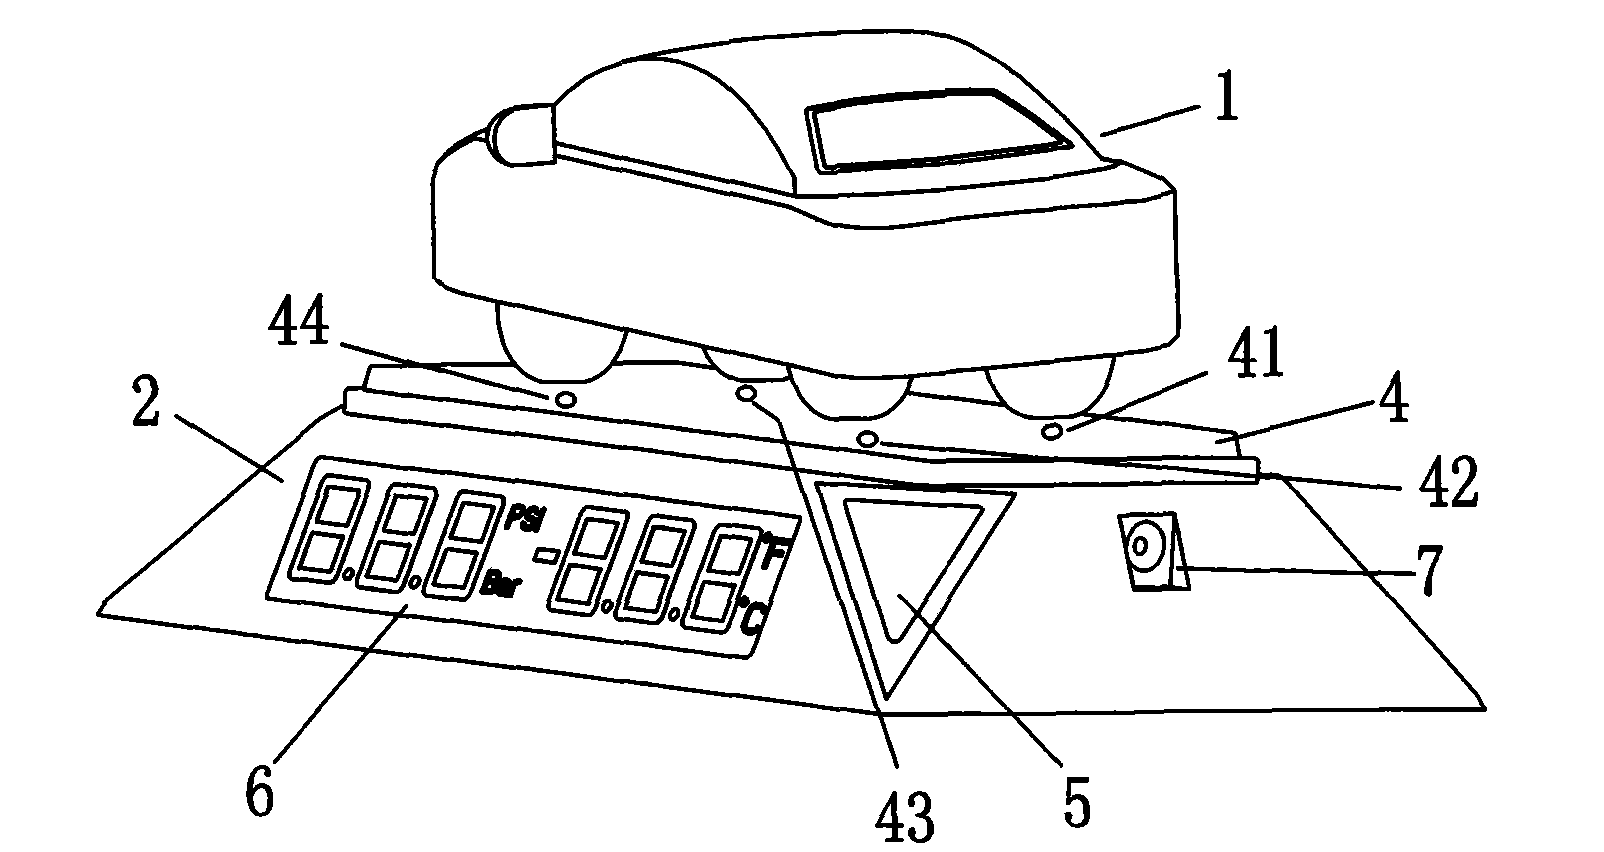 Vehicle tyre pressure monitoring and alarm device displayed by vehicle model